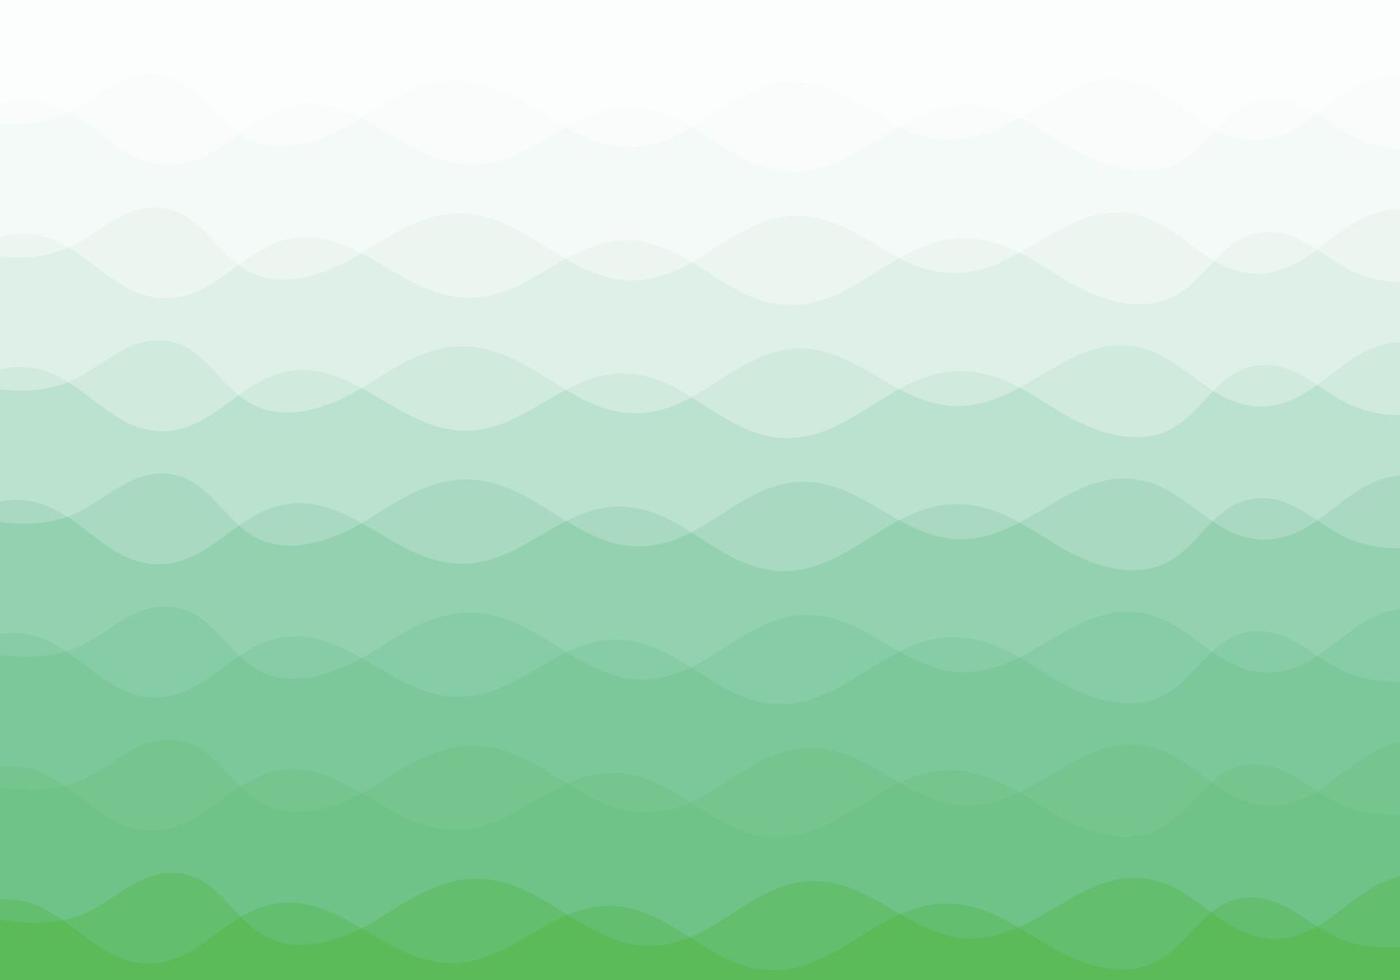 An abstract background composed of overlapping wavy lines. Gradient from light green to dark vector